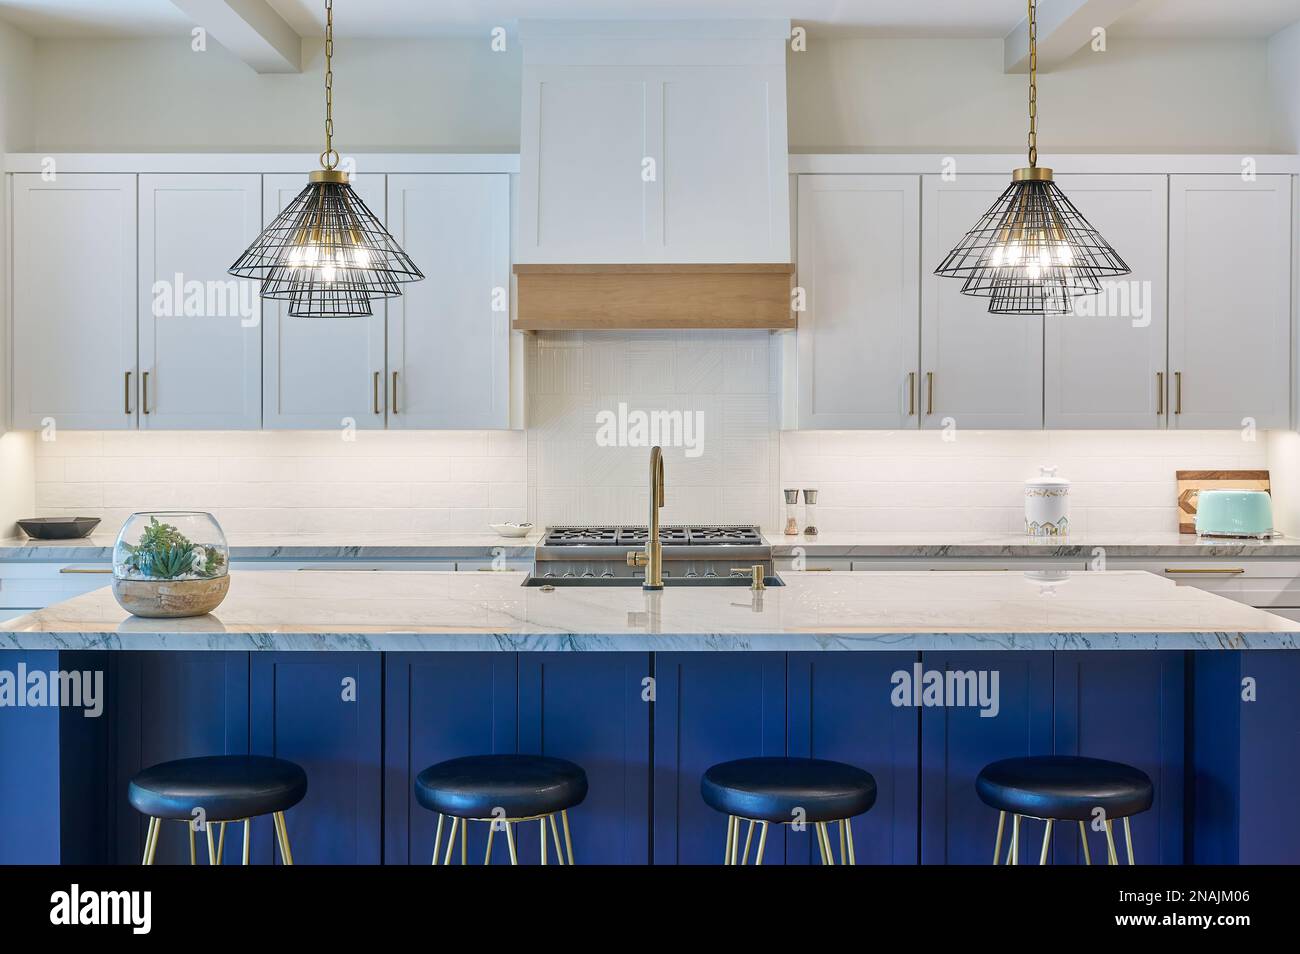 Straight on view of a contemporary kitchen with bar stools, pendant lighting, and cabinetry Stock Photo